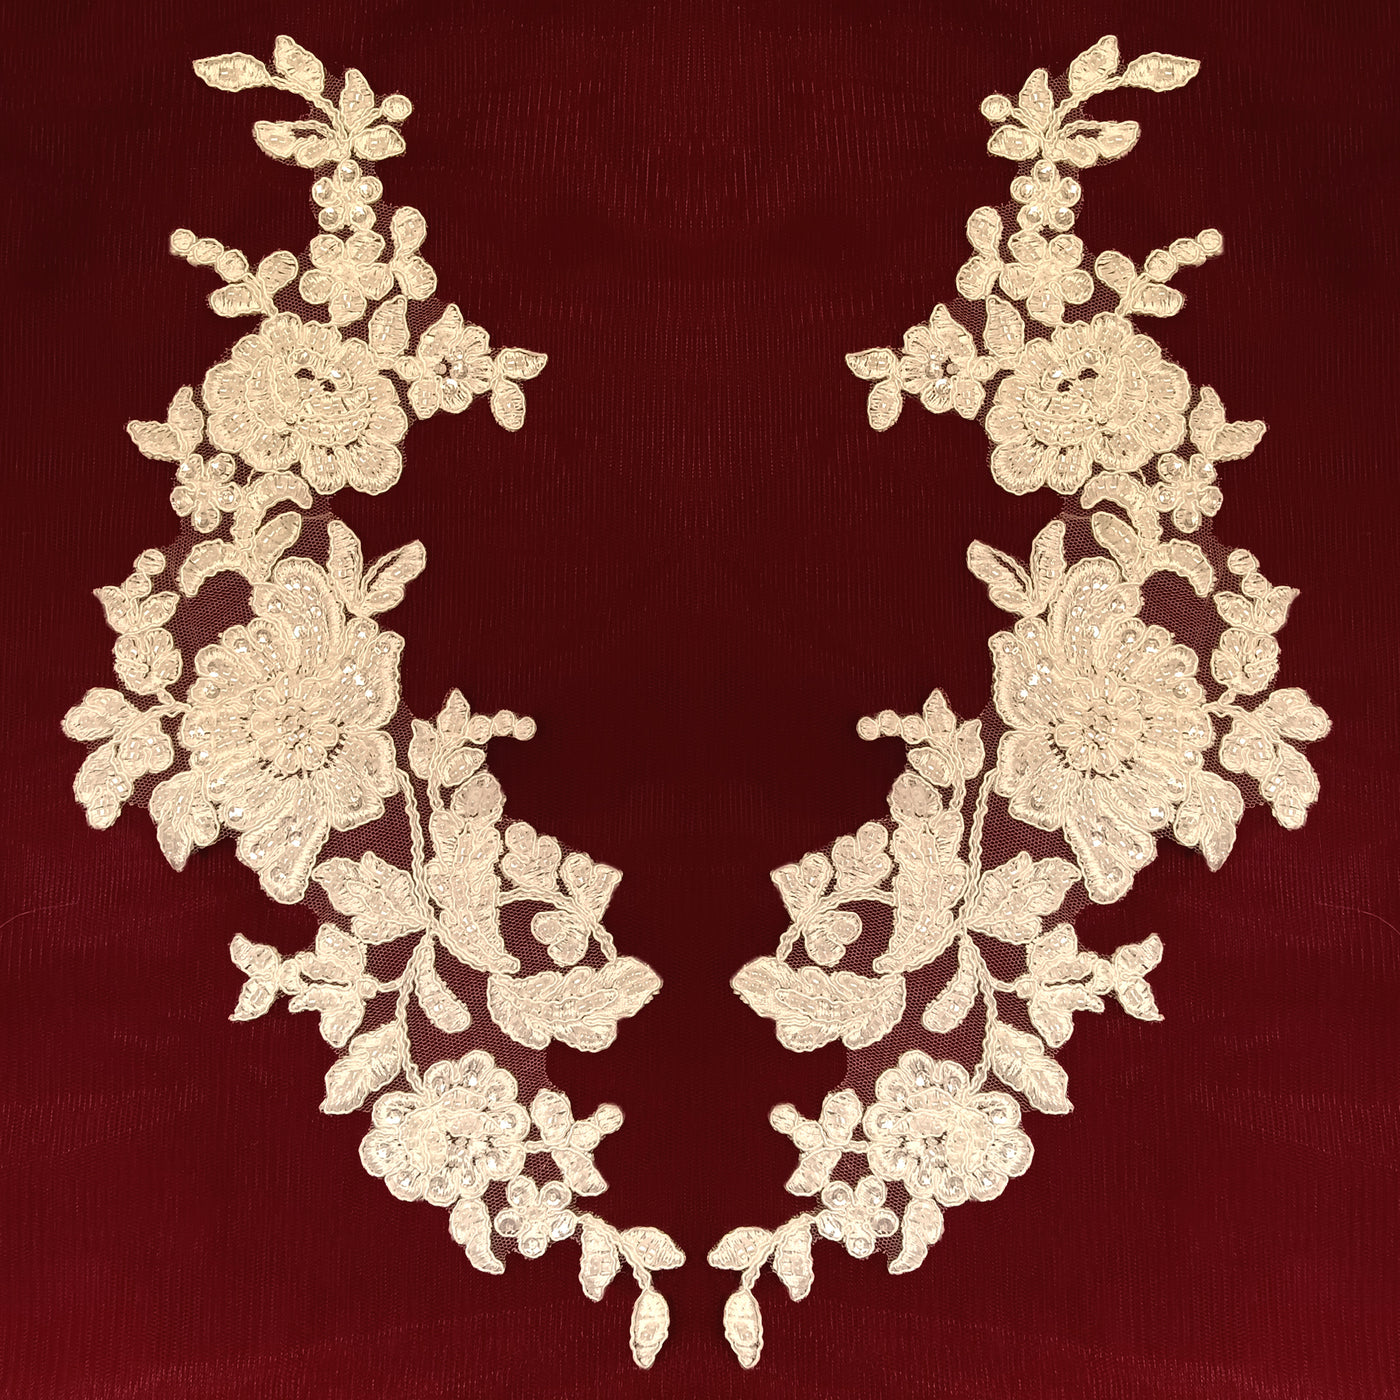 Beaded & Corded White Floral Appliqué Lace Embroidered on 100% Polyester Organza or Net Mesh. This can be applied to Theatrical dance ballroom costumes, bridal dresses, bridal headbands endless possibilities.  Sold By Pair.  Lace Usa